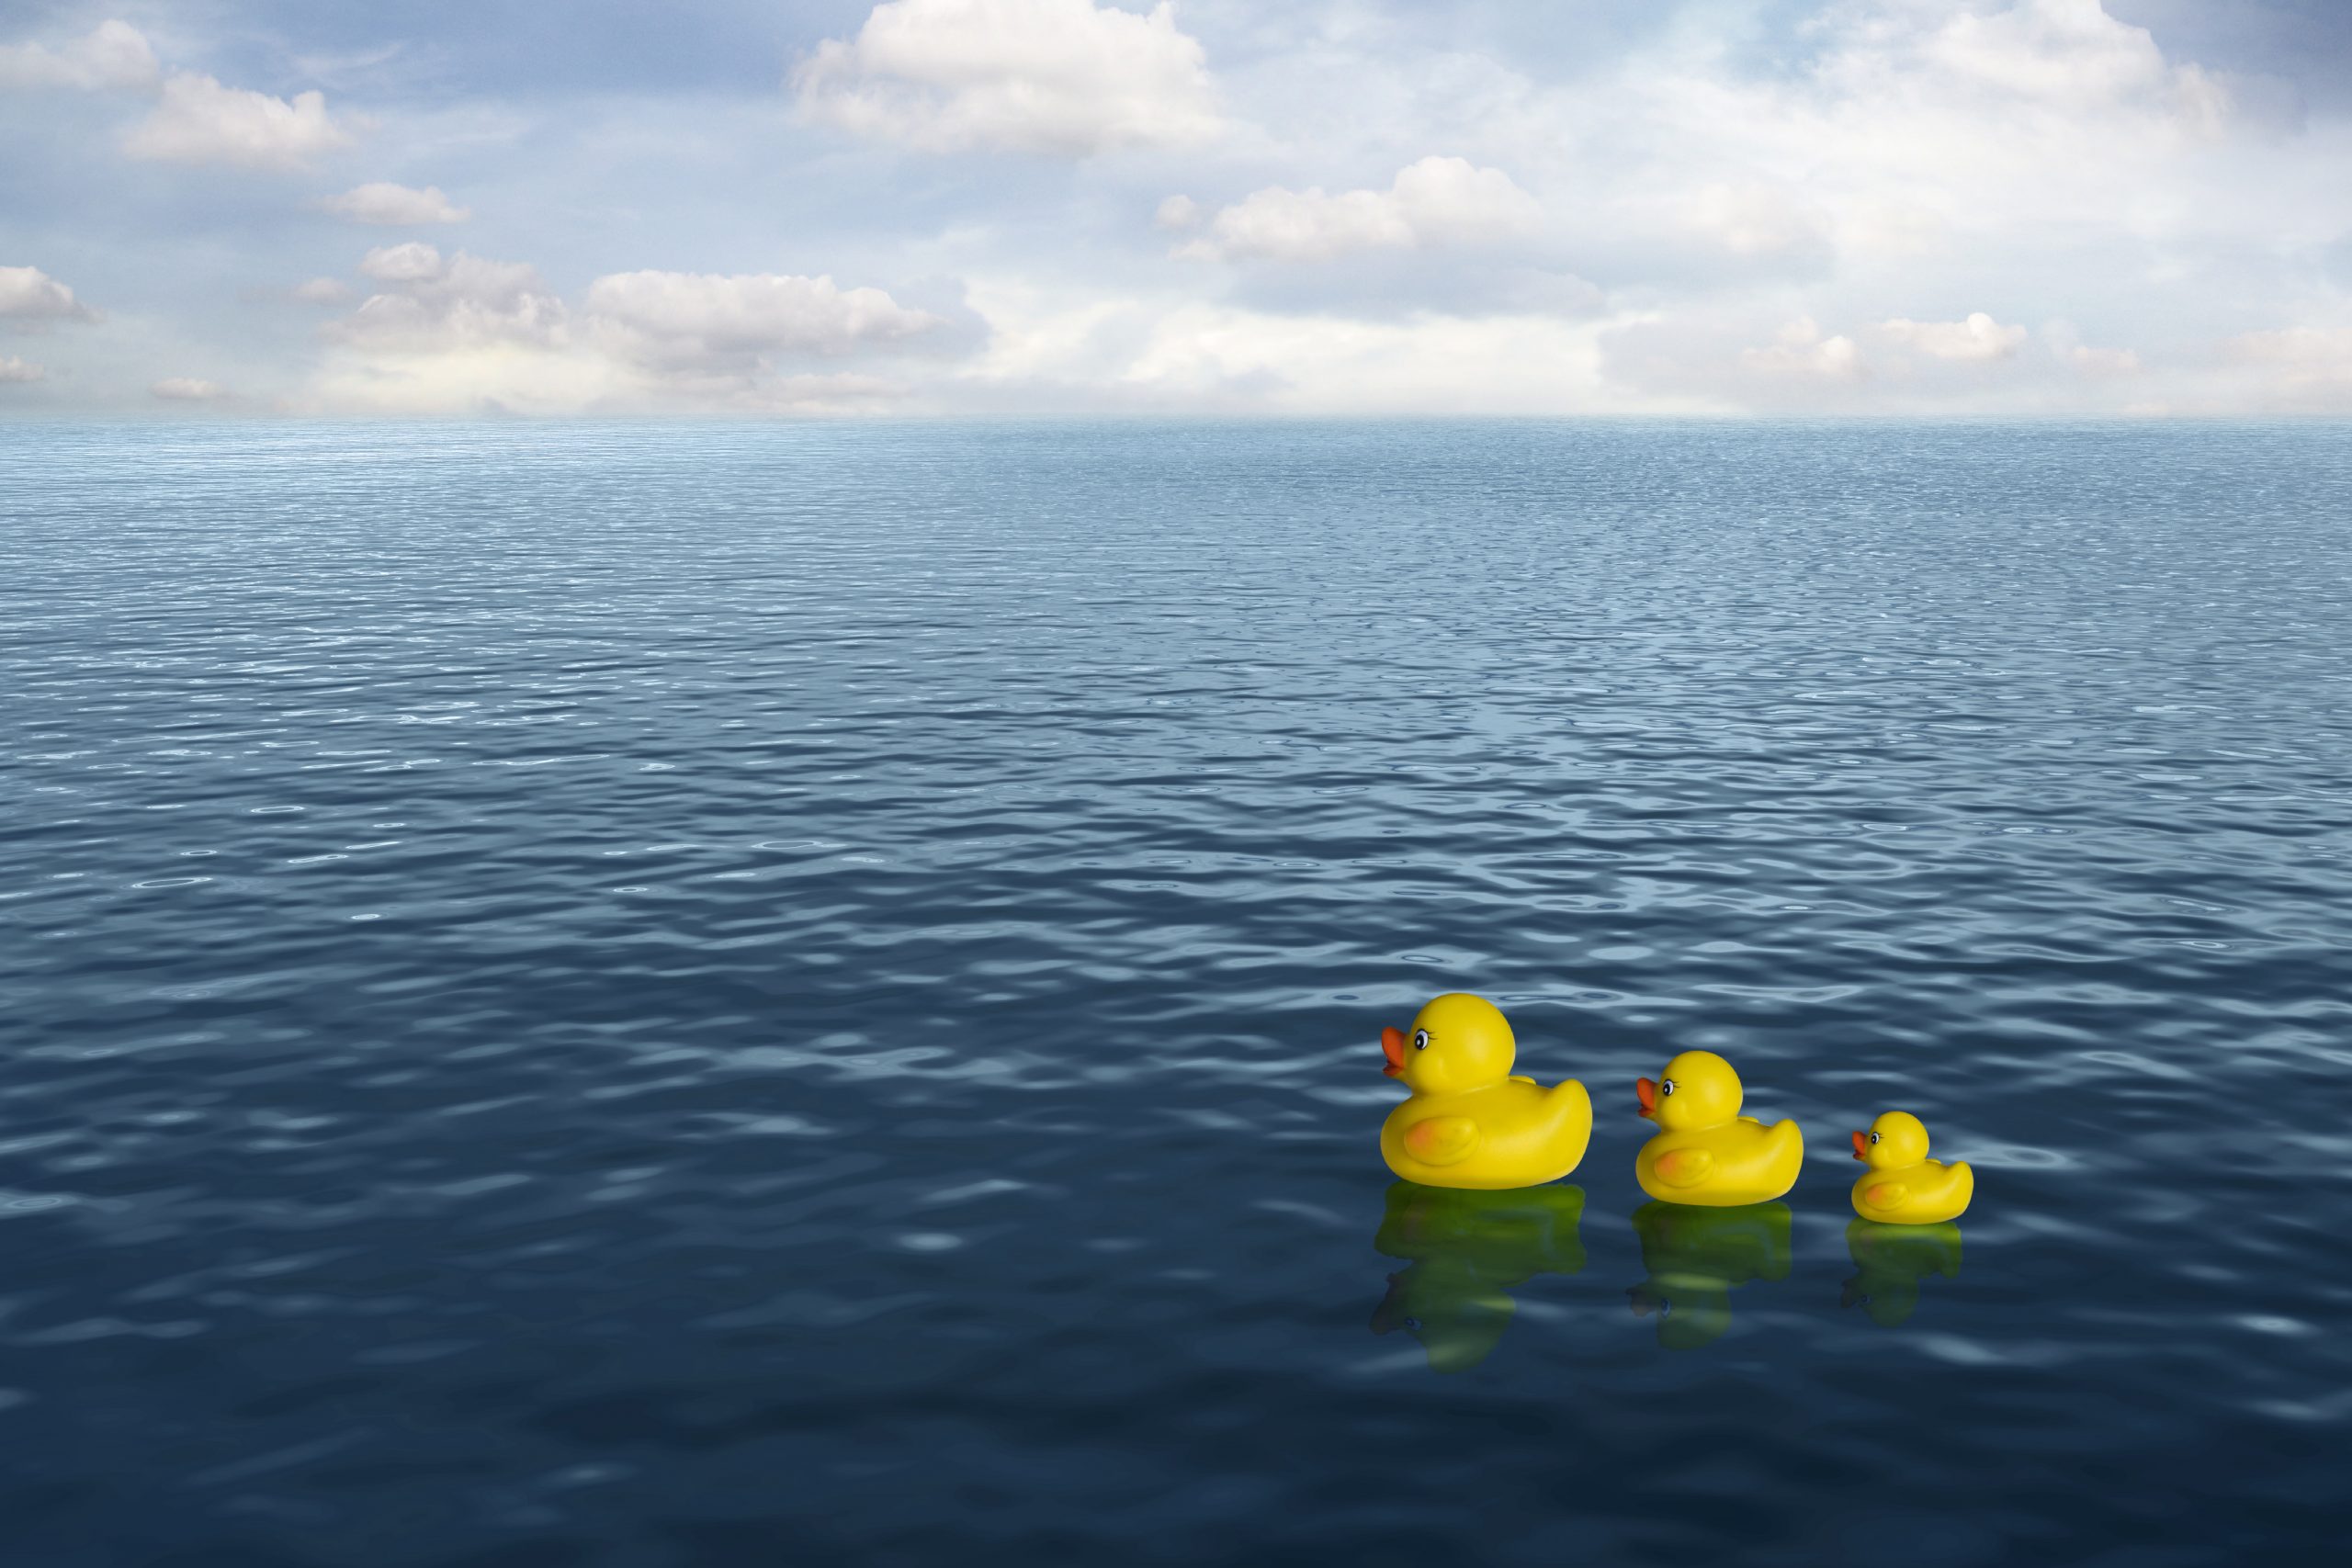 Three yellow rubber ducks floating on a calm blue ocean under a partly cloudy sky, embodying gratitude this year.